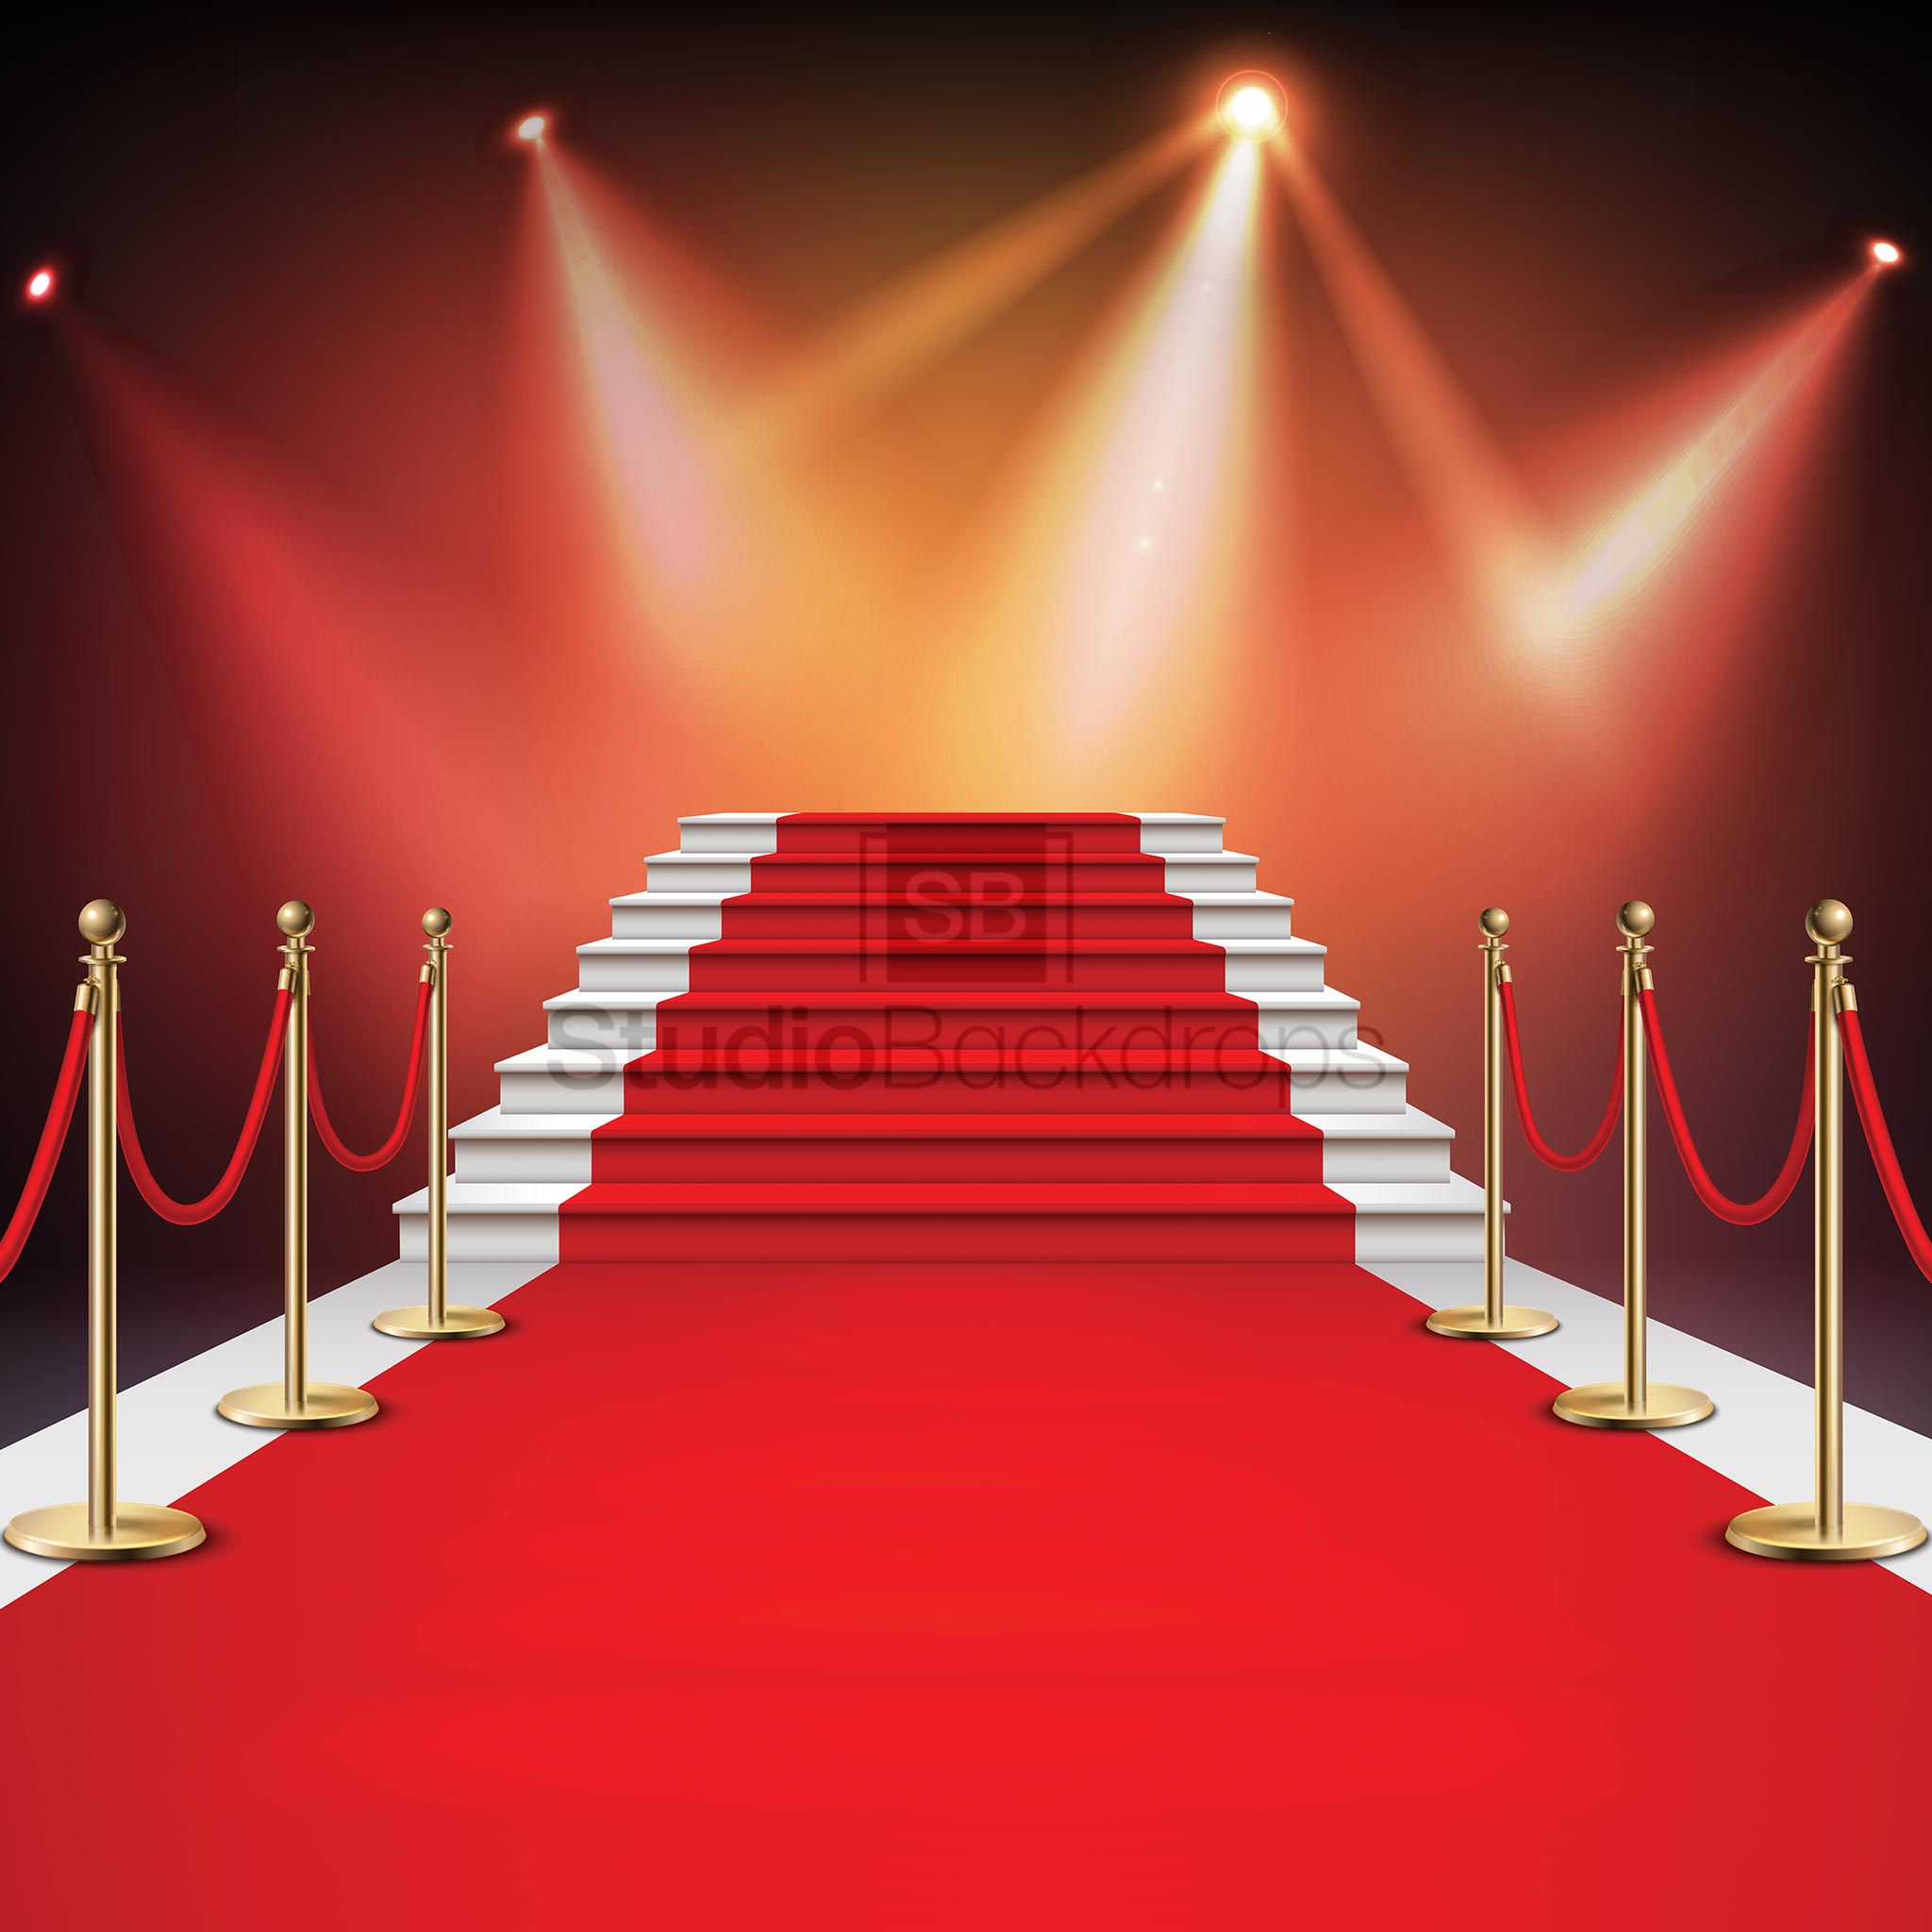 Hollywood Red Carpet Photo Booth Backdrop BD-185-SCE – Studio Backdrops